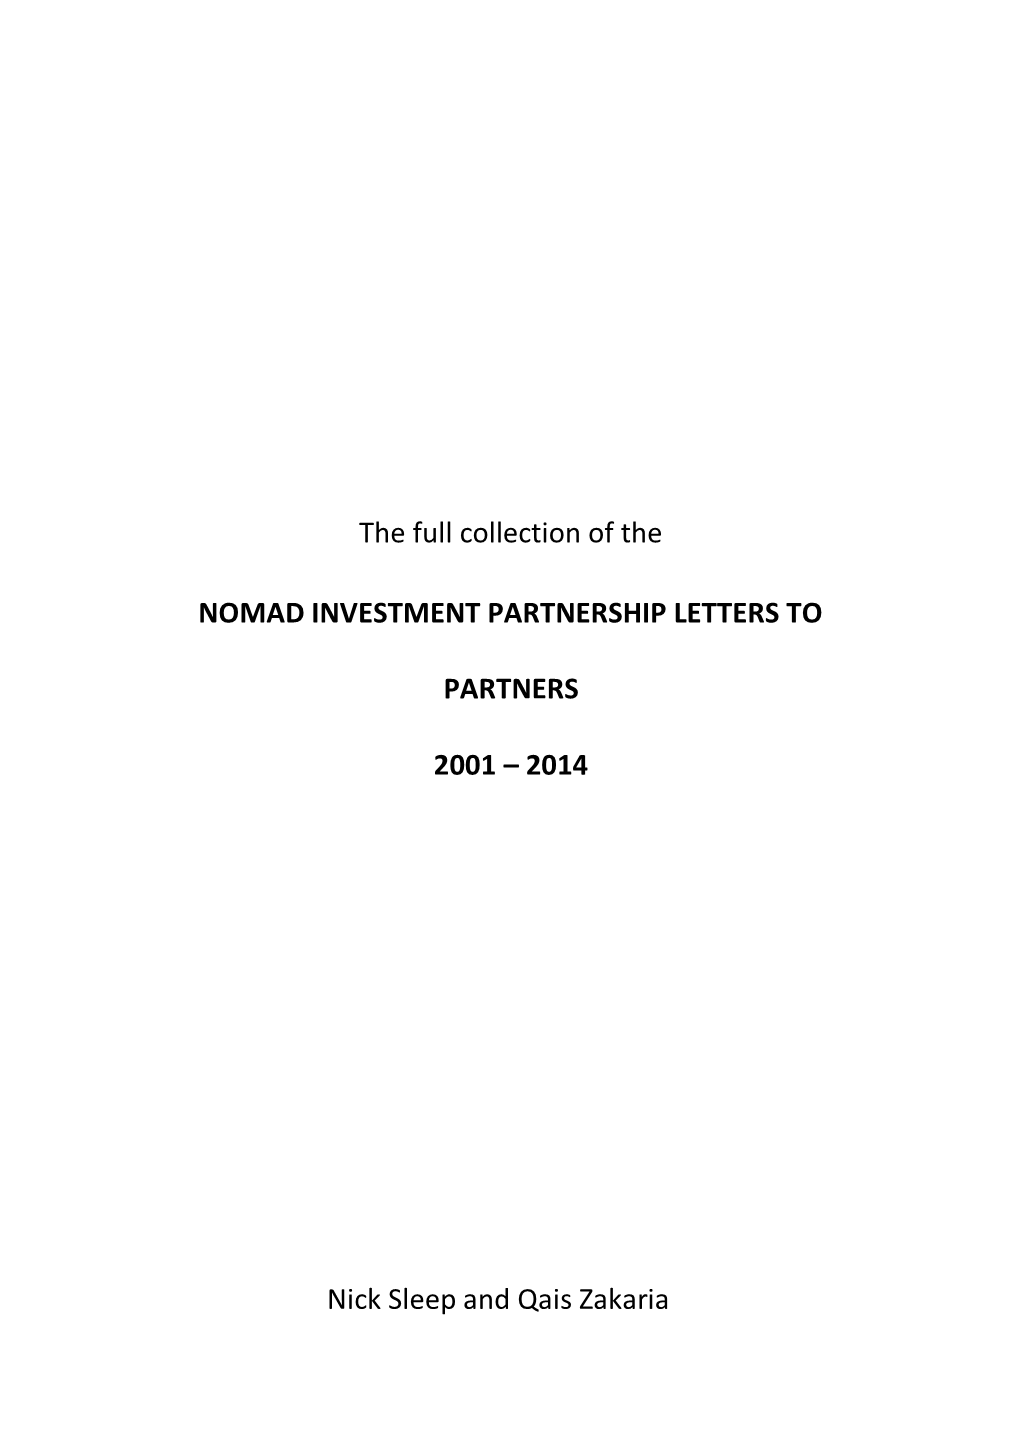 The Full Collection of the NOMAD INVESTMENT PARTNERSHIP LETTERS to PARTNERS 2001 – 2014 Nick Sleep and Qais Zakaria